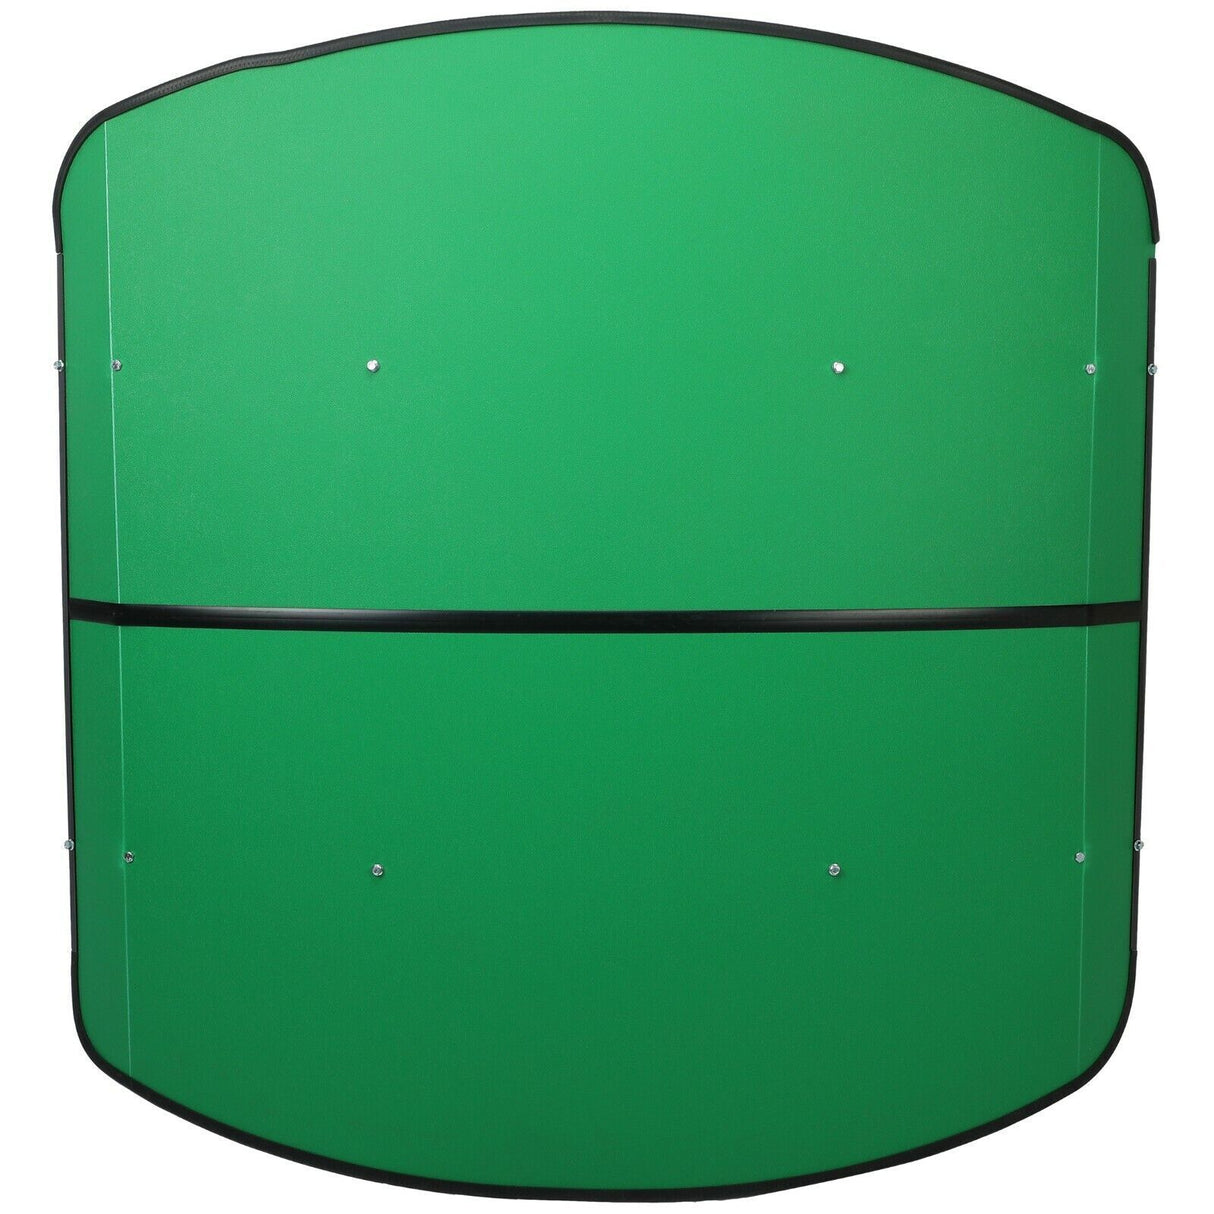 Green Tractor Canopy Compatible with All ROPS 48-3/8" X 48-3/8" Equipped Tractors and Mowers with a 2" x 2" or 2" x 3" ROPS (Will Add About 4'' to The Height of The Tractor)